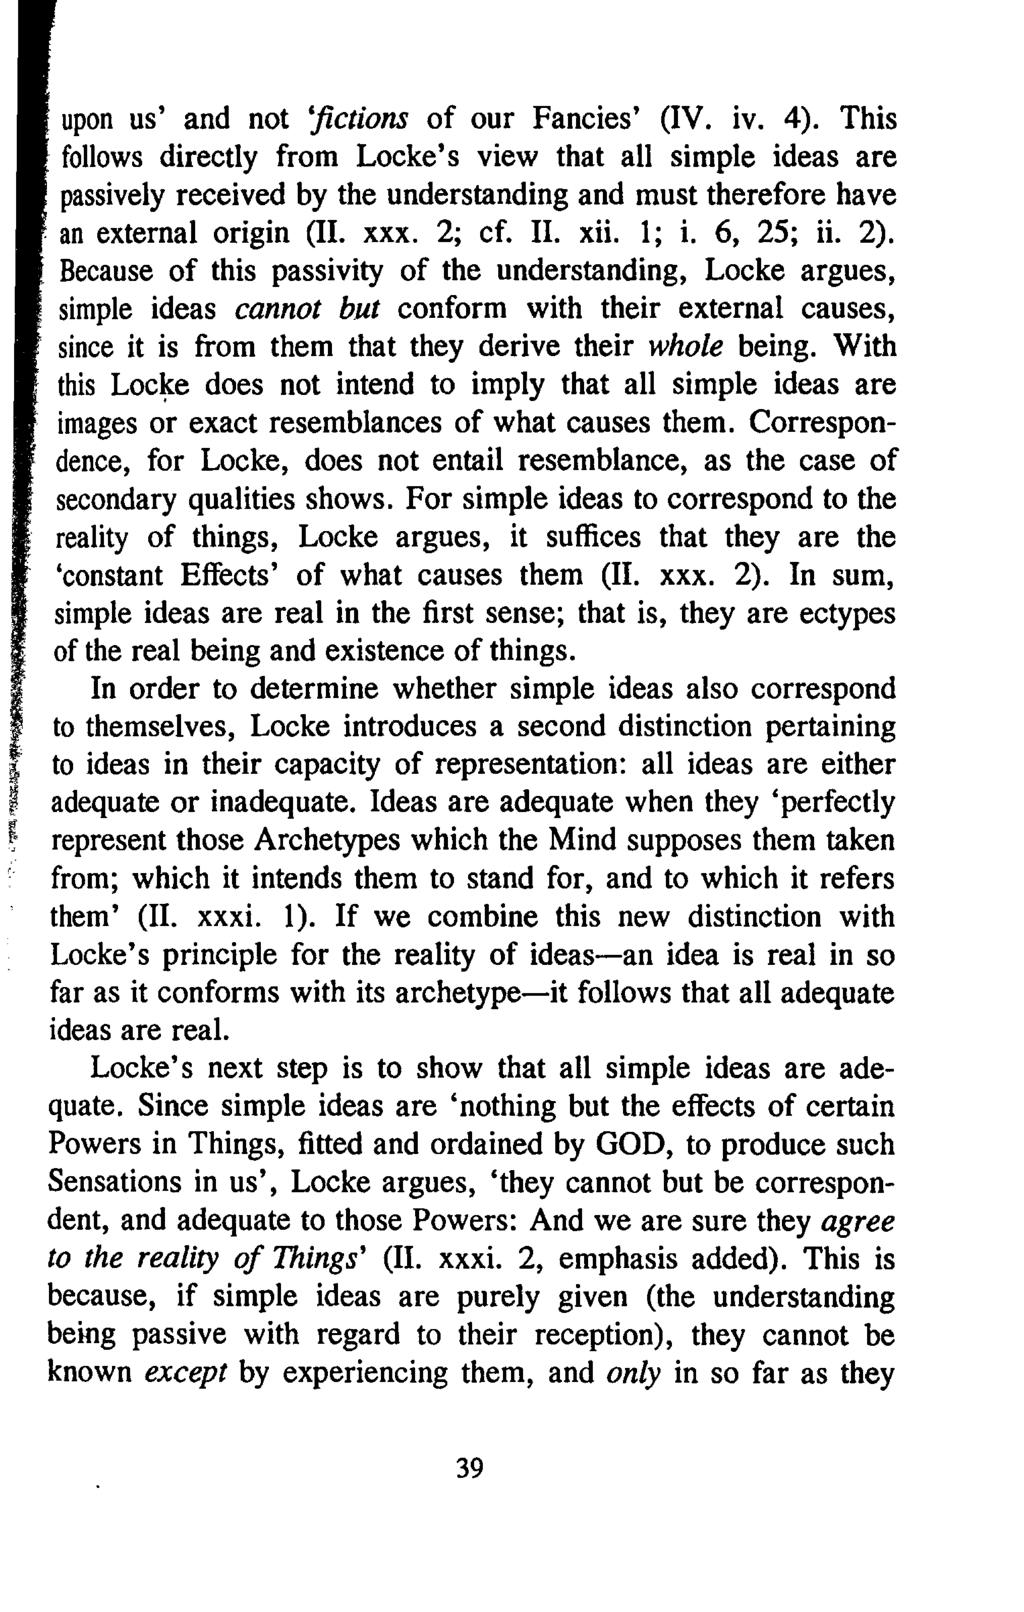 upon us' and not 'fictions of our Fancies' (IV. iv. 4). This follows directly from Locke's view that all simple ideas are passively received by the understanding and must therefore have.